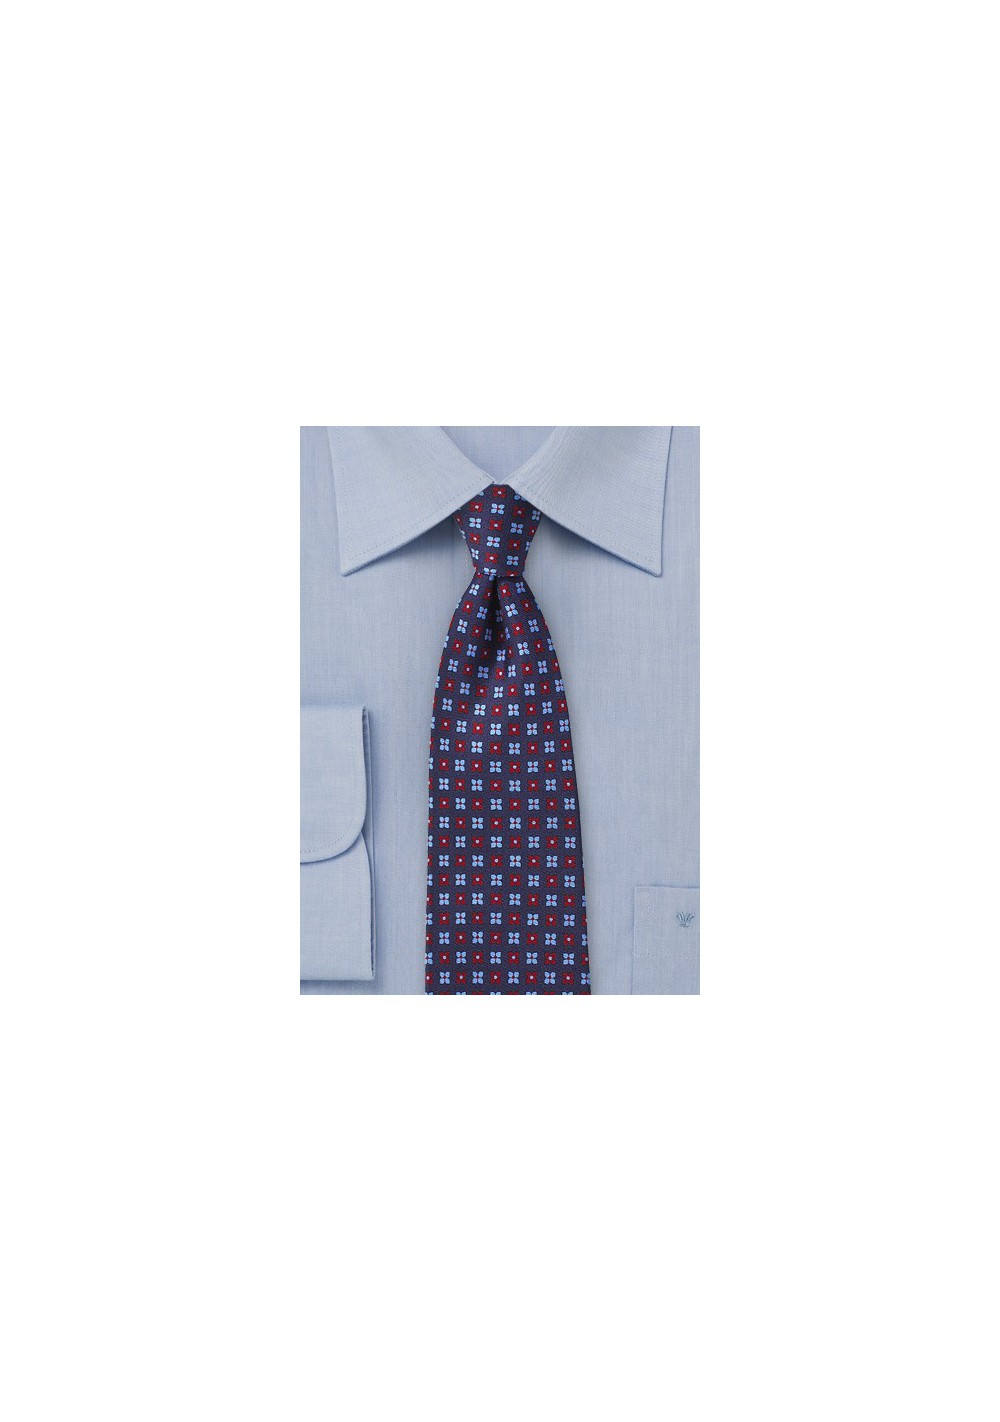 Floral Tie in Navy, Blue, and Red